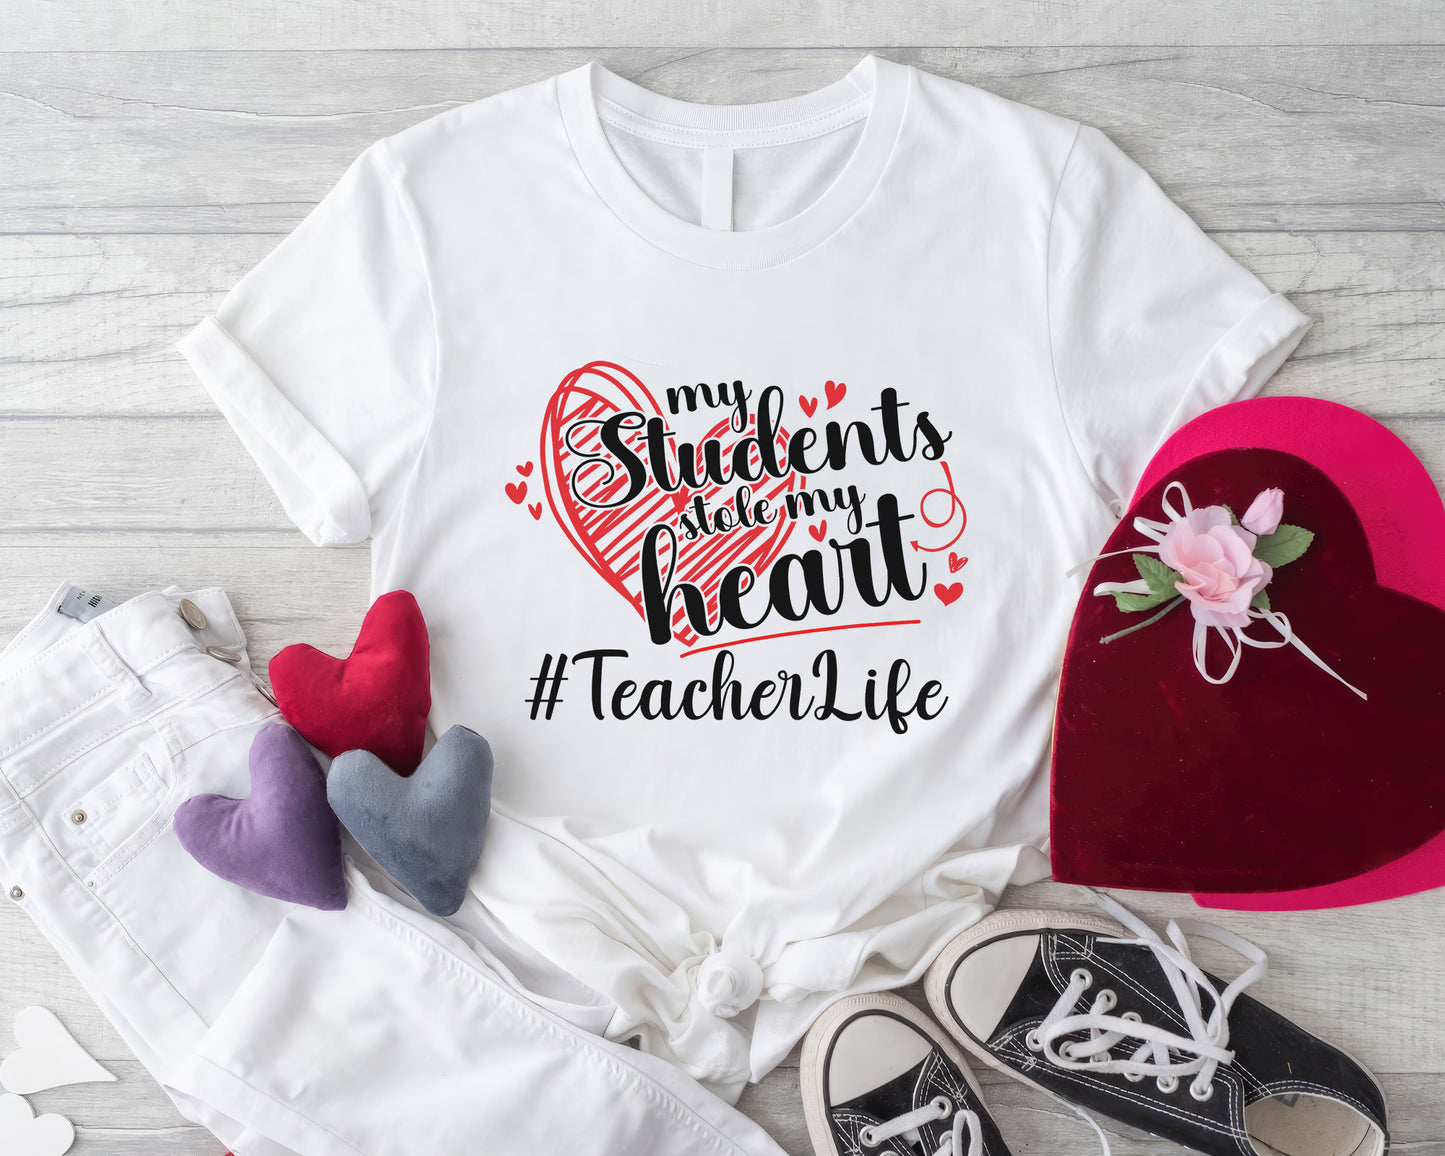 Tee Art Online My Students Stole My Heart Personalized Tee - White